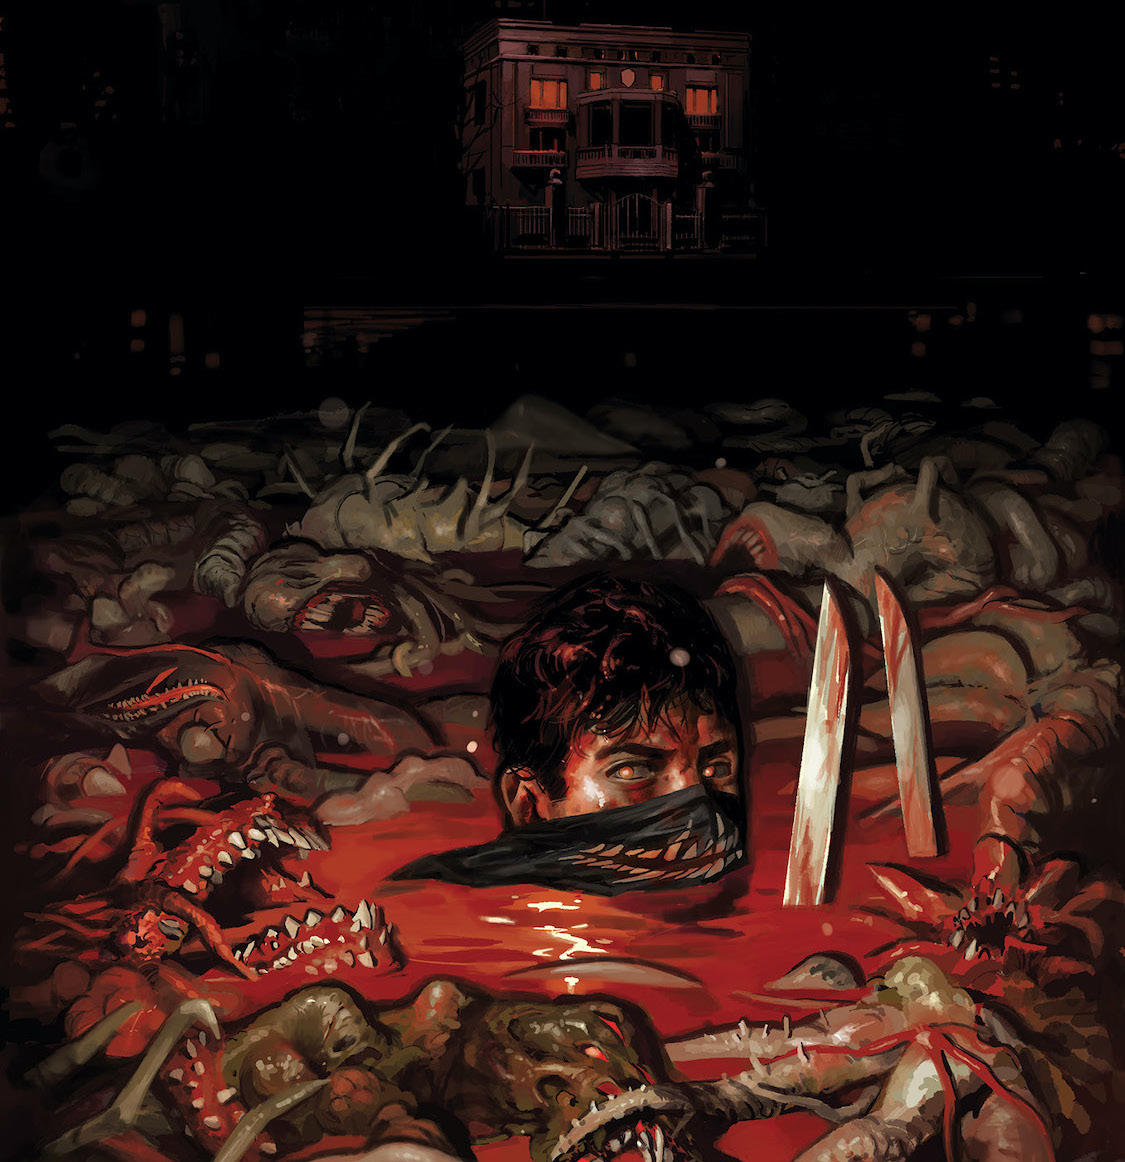 BOOM! First Look: House of Slaughter #1